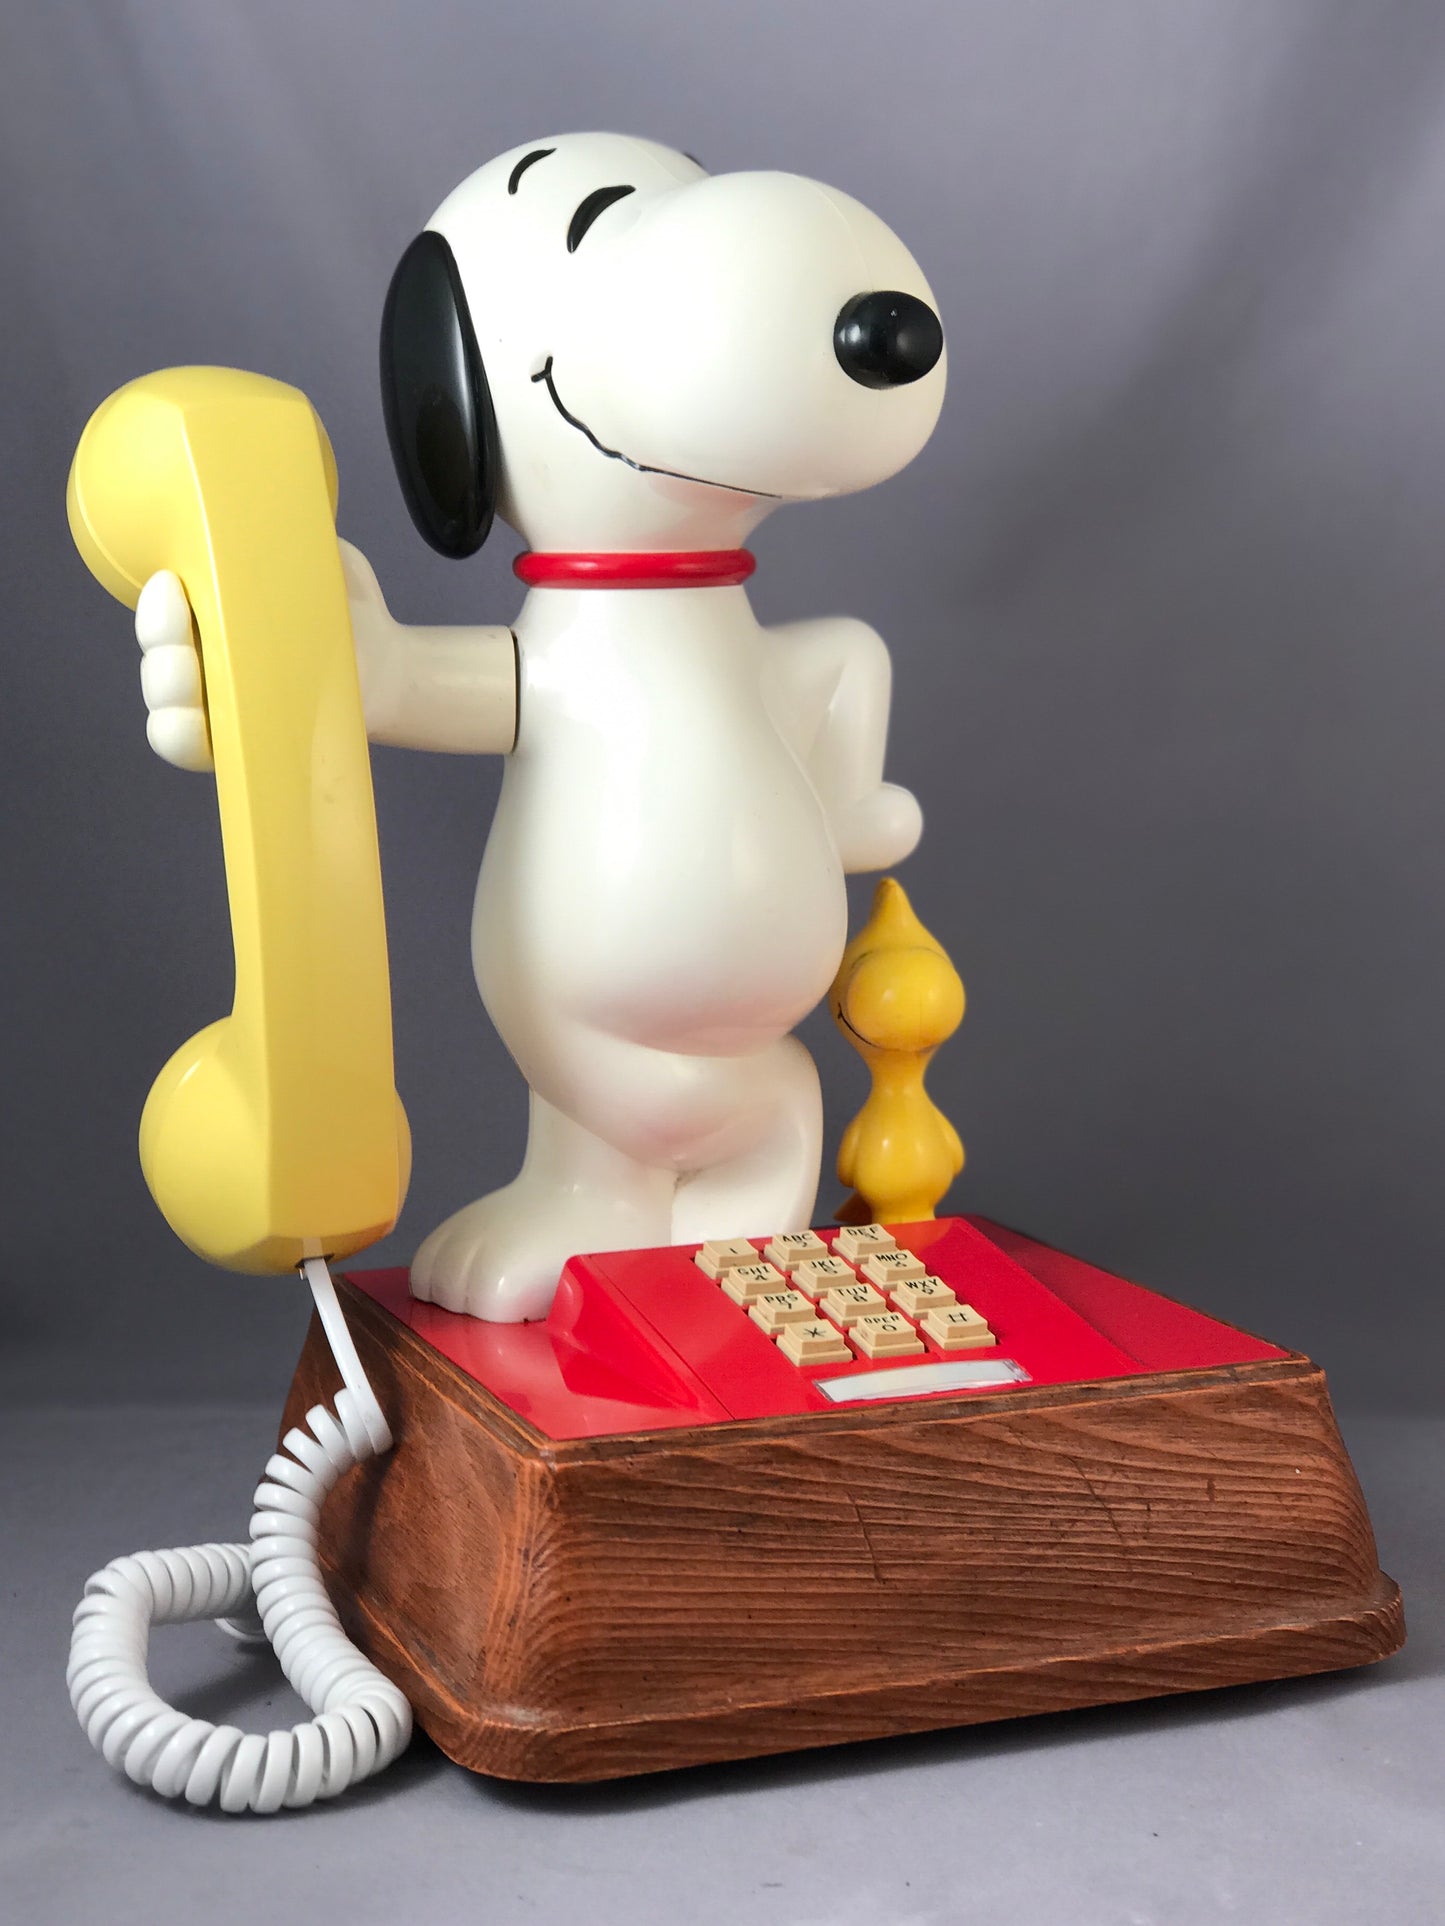 The Snoopy and Woodstock Telephone